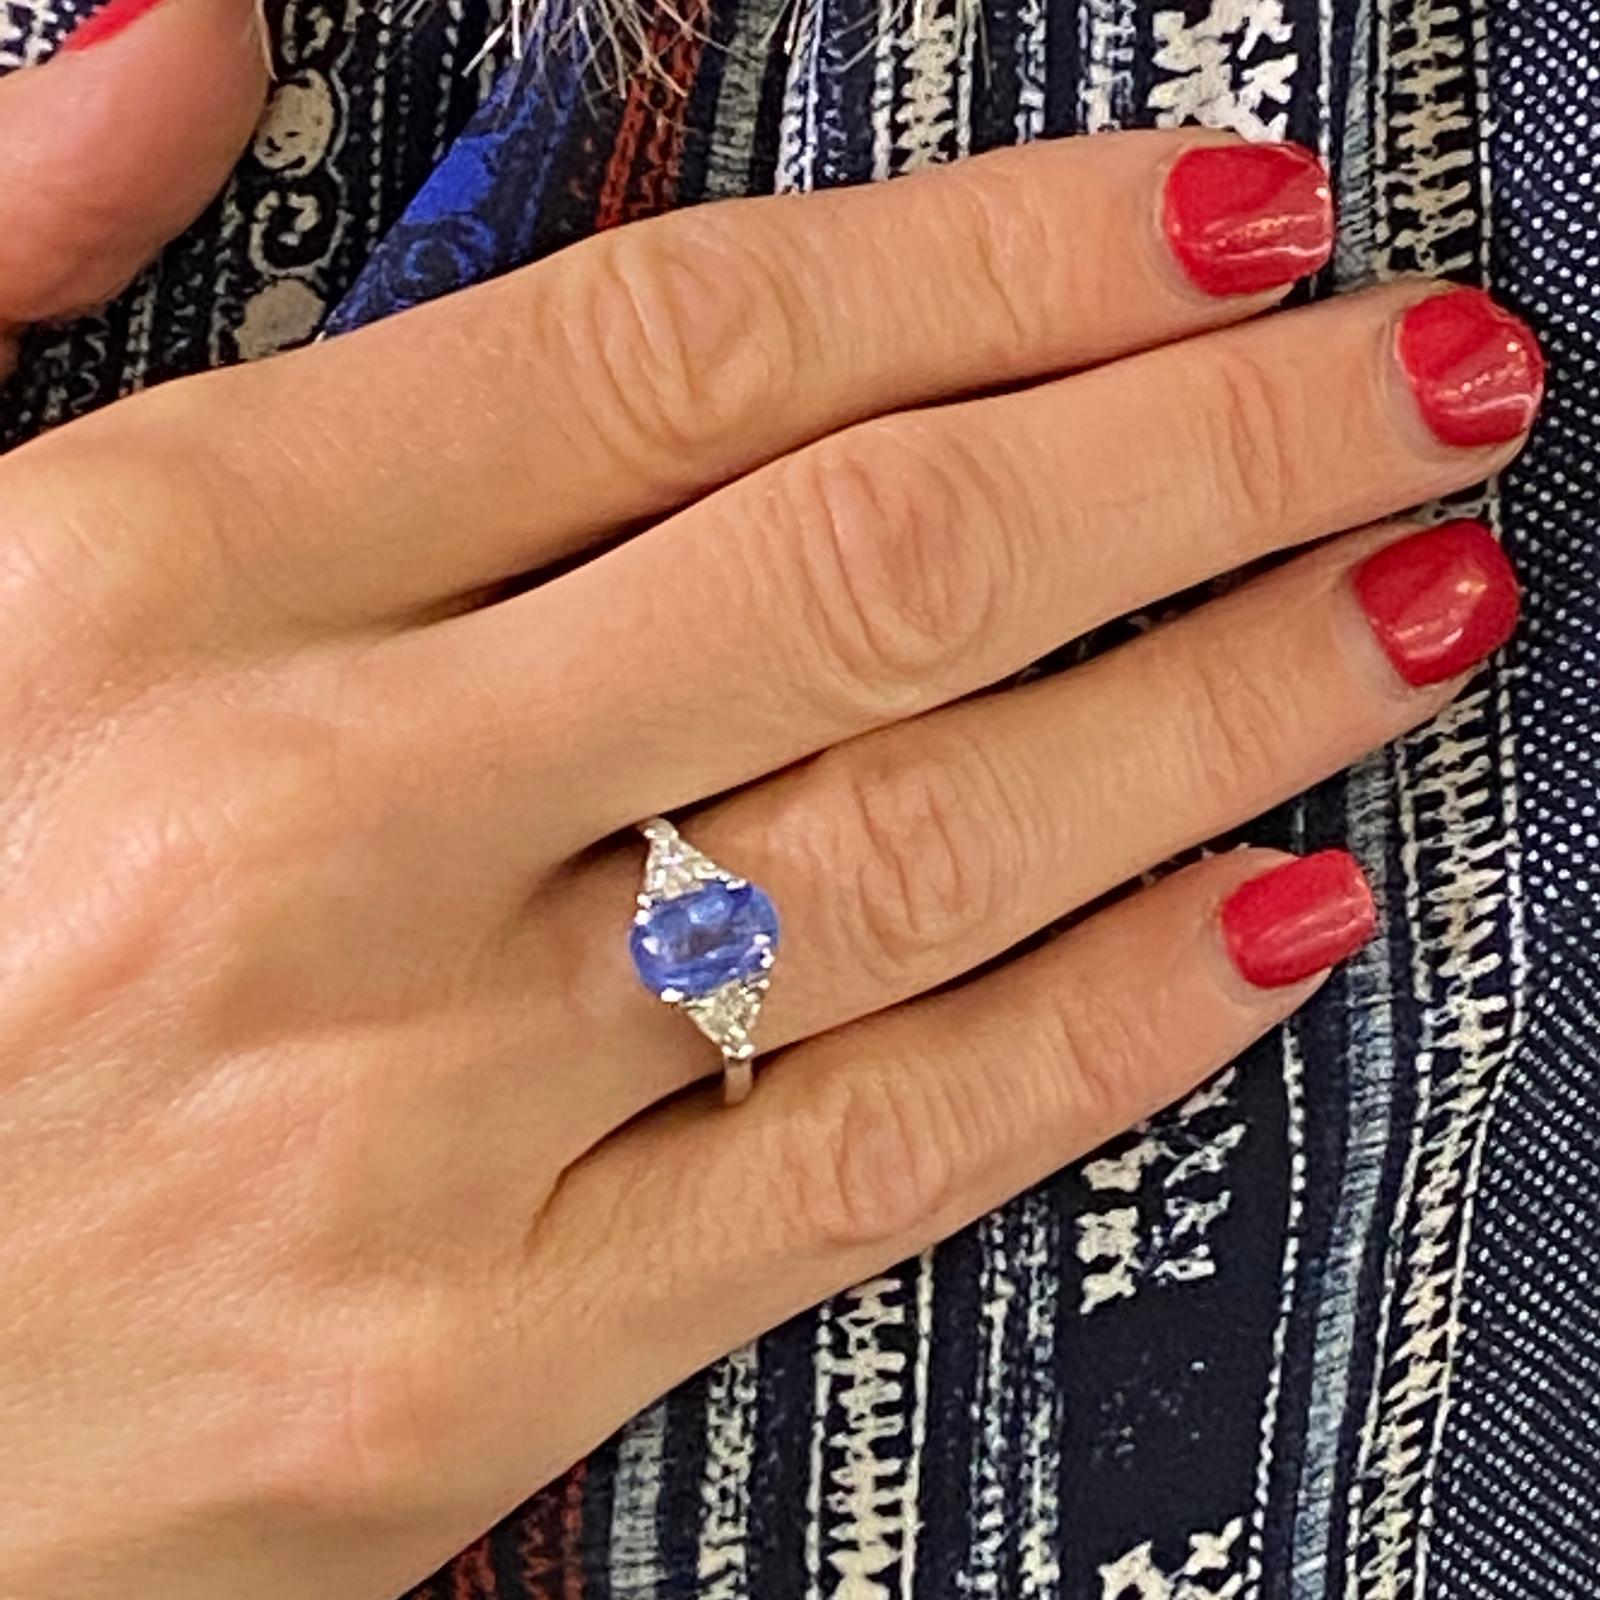 Stunning Ceylon blue sapphire diamond ring fashioned in platinum. The oval Ceylon sapphire weighs 2.50 carats and has not been treated (no heat) and is certified by the AGL. The sapphire is flanked by two trillion cut diamonds weighing .50 carat